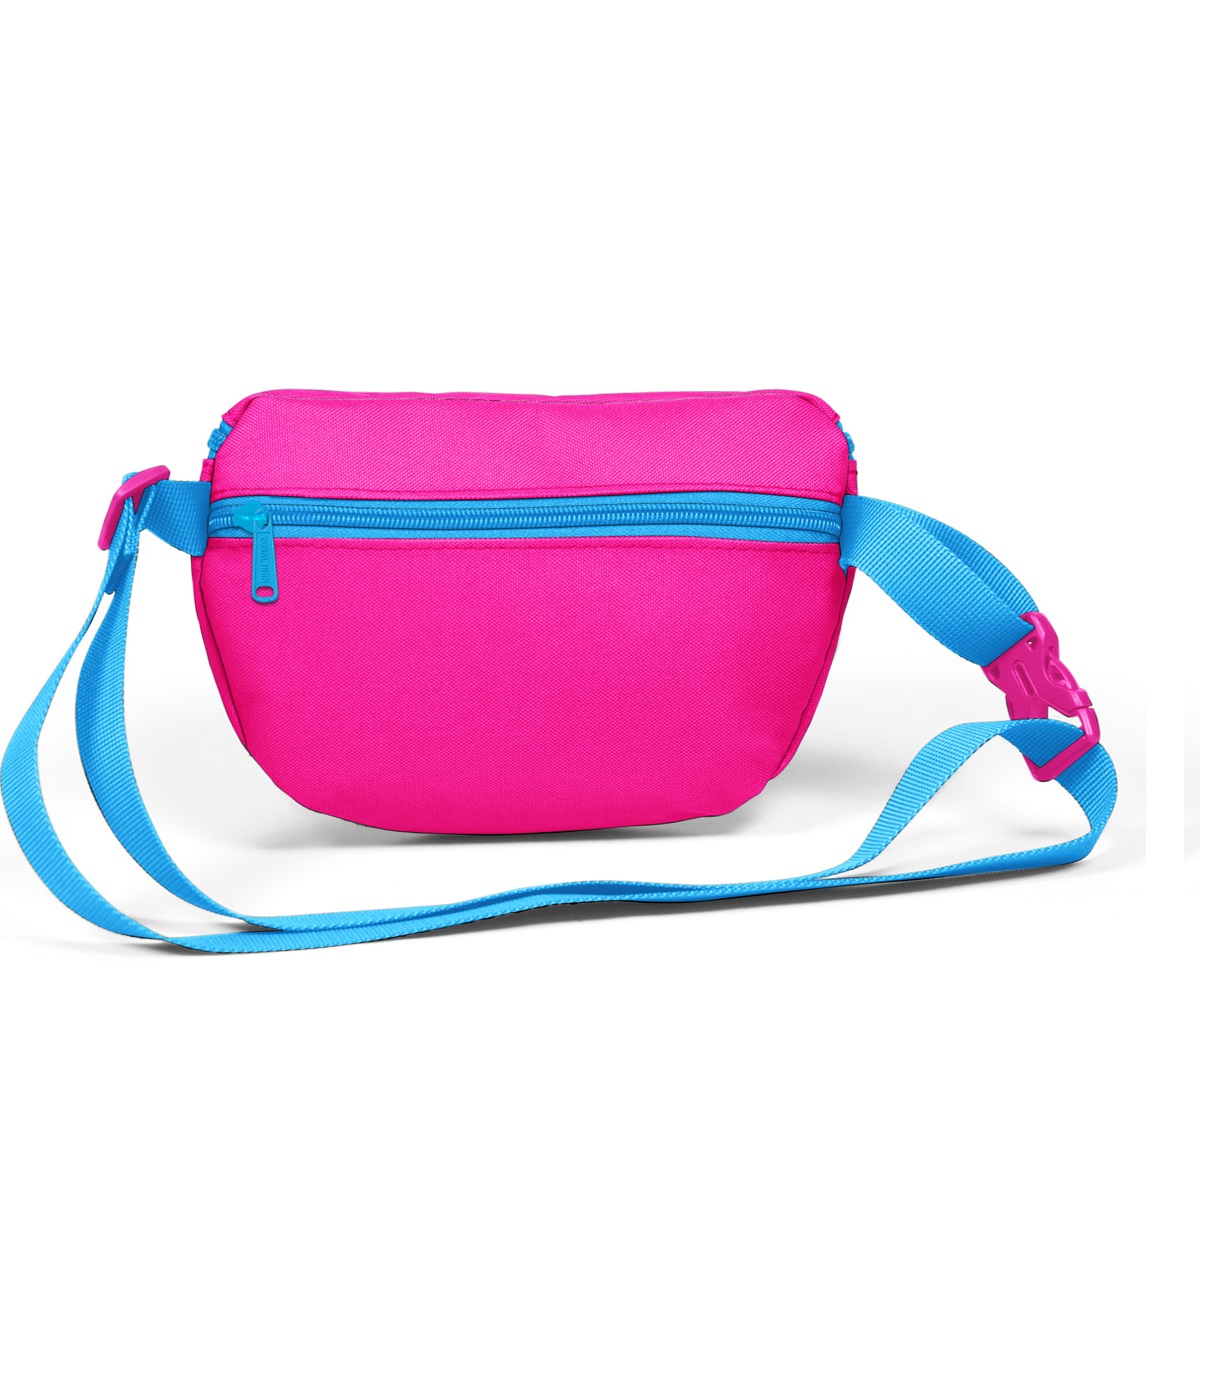 Coral High Sport Two Compartment Waist Bag - Neon Pink Blue